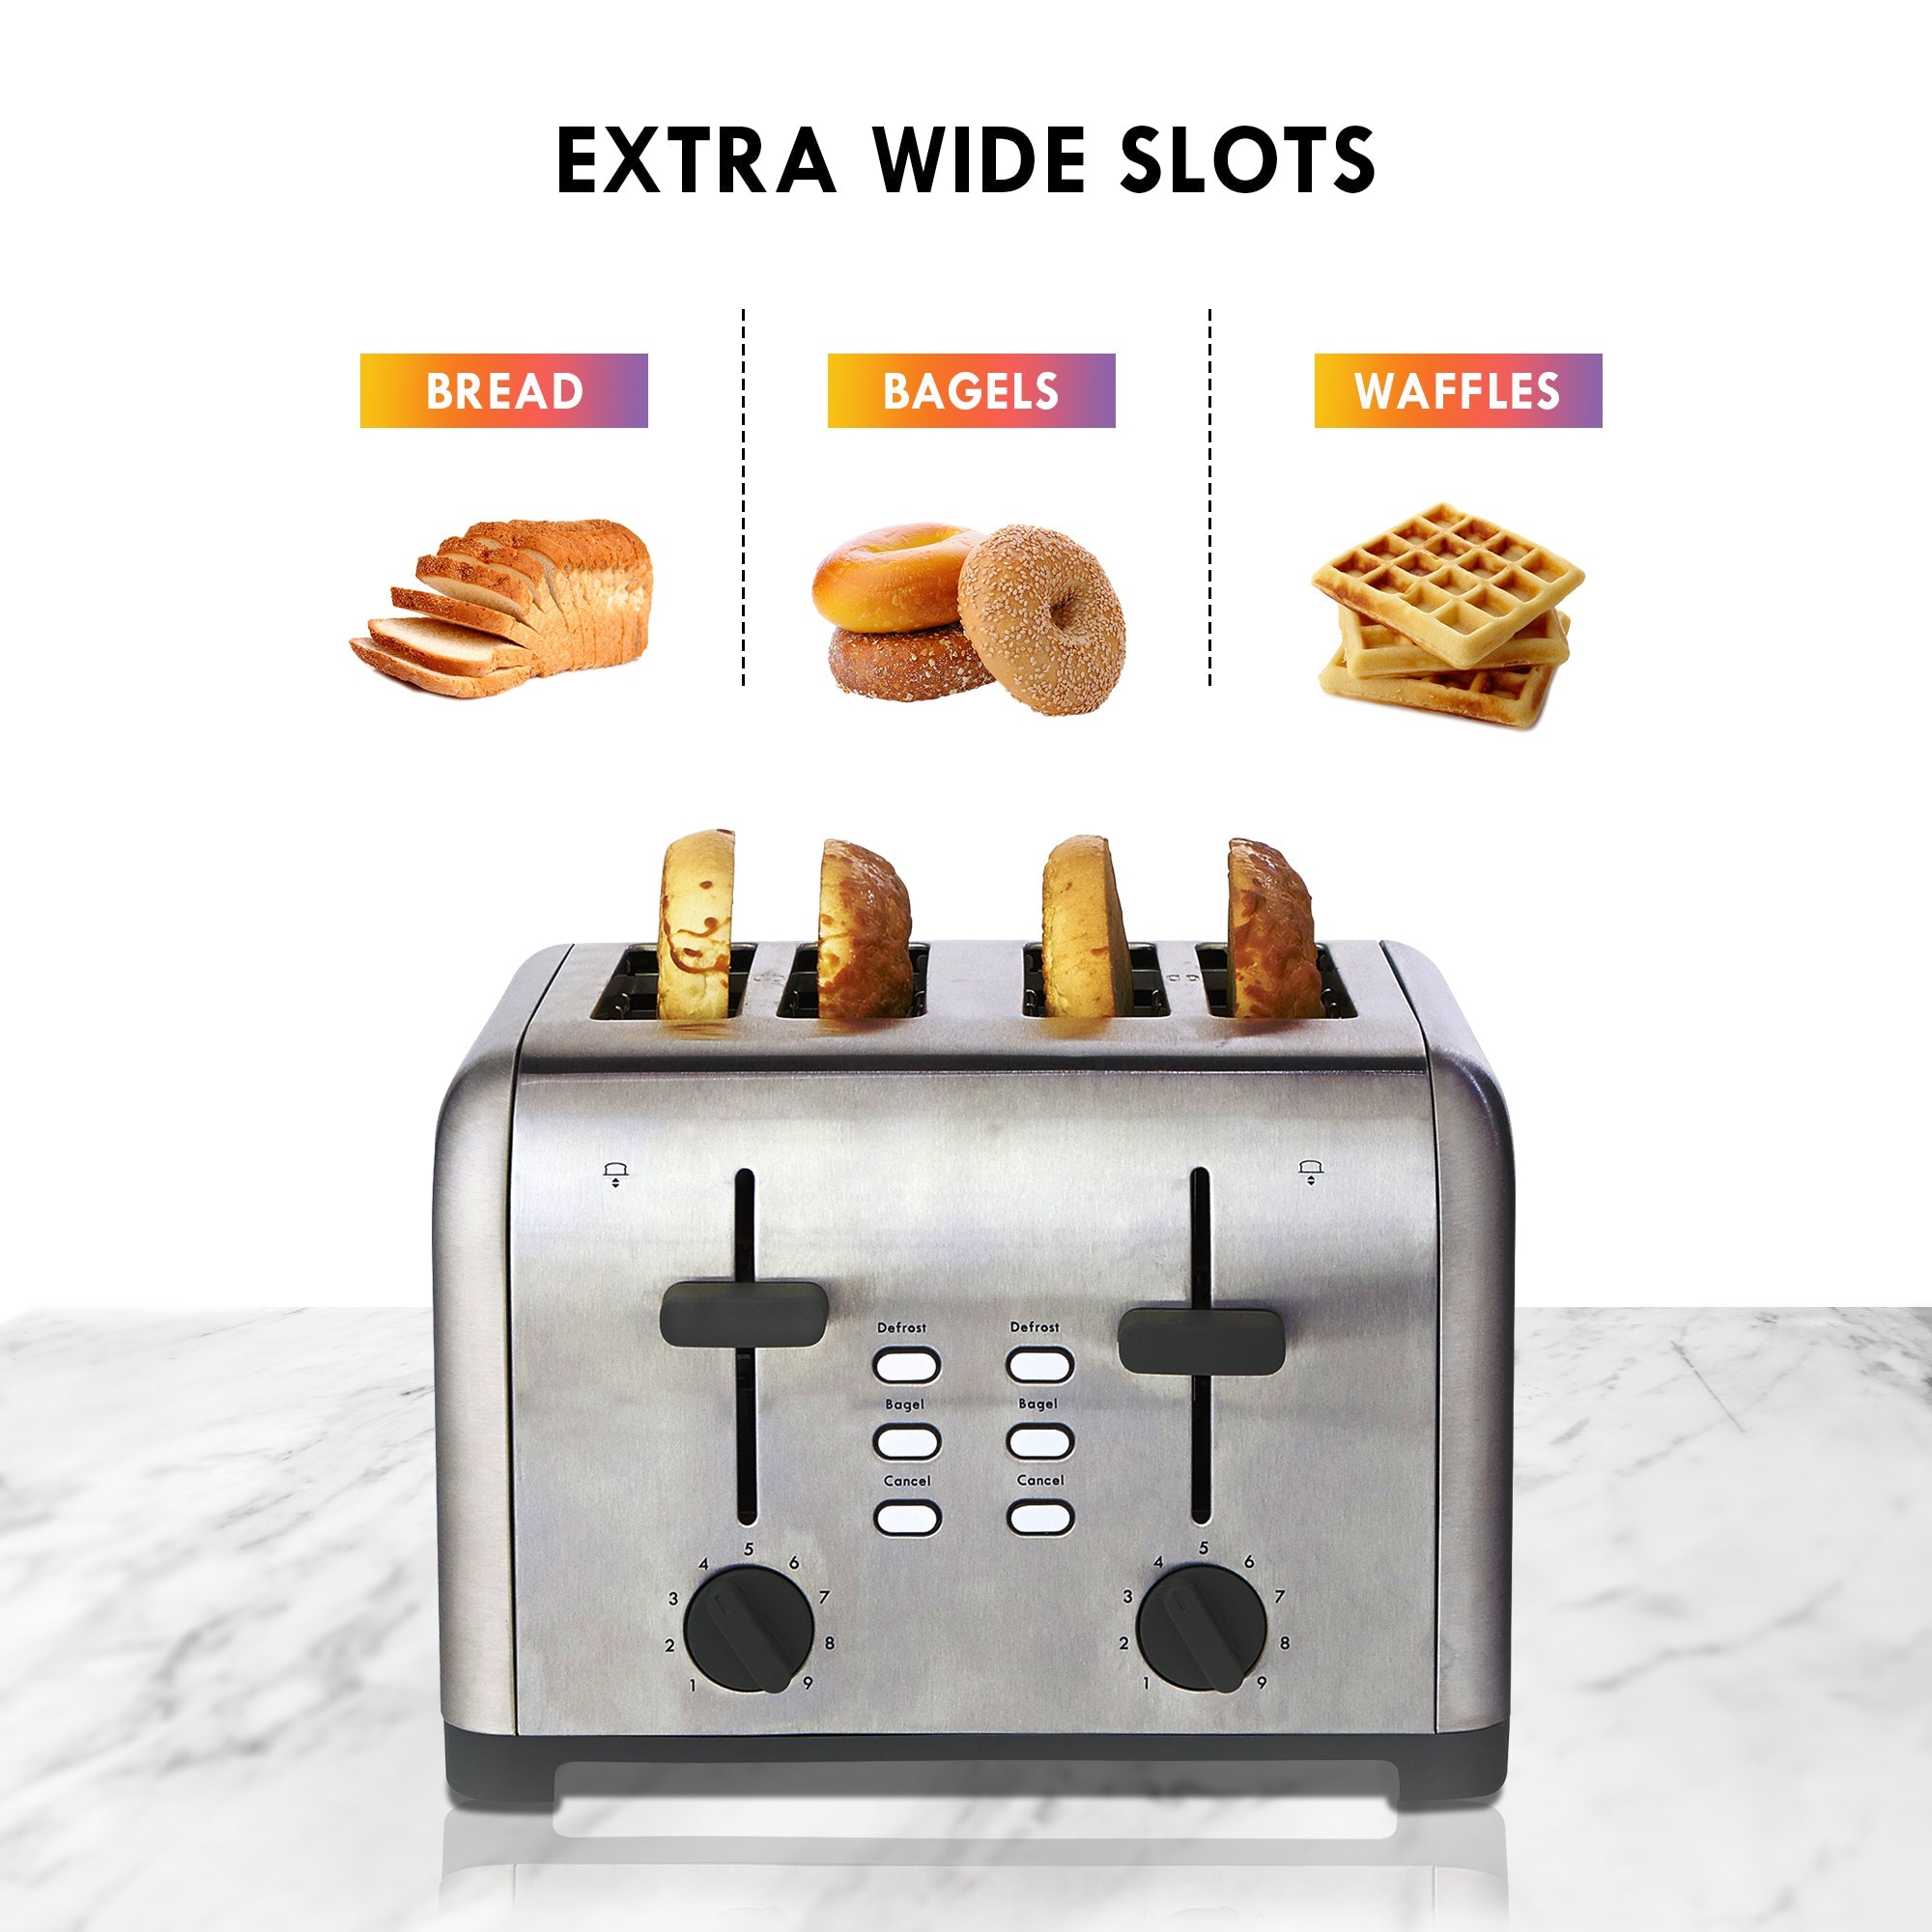 Product shot of Kenmore 4-slice stainless steel toaster with four bagel halves inside on a white marbled countertop with a white background. Above are small pictures of a loaf of bread, a stack of bagels, and a stack of waffles, labeled. Text at the top reads, "Extra wide slots"